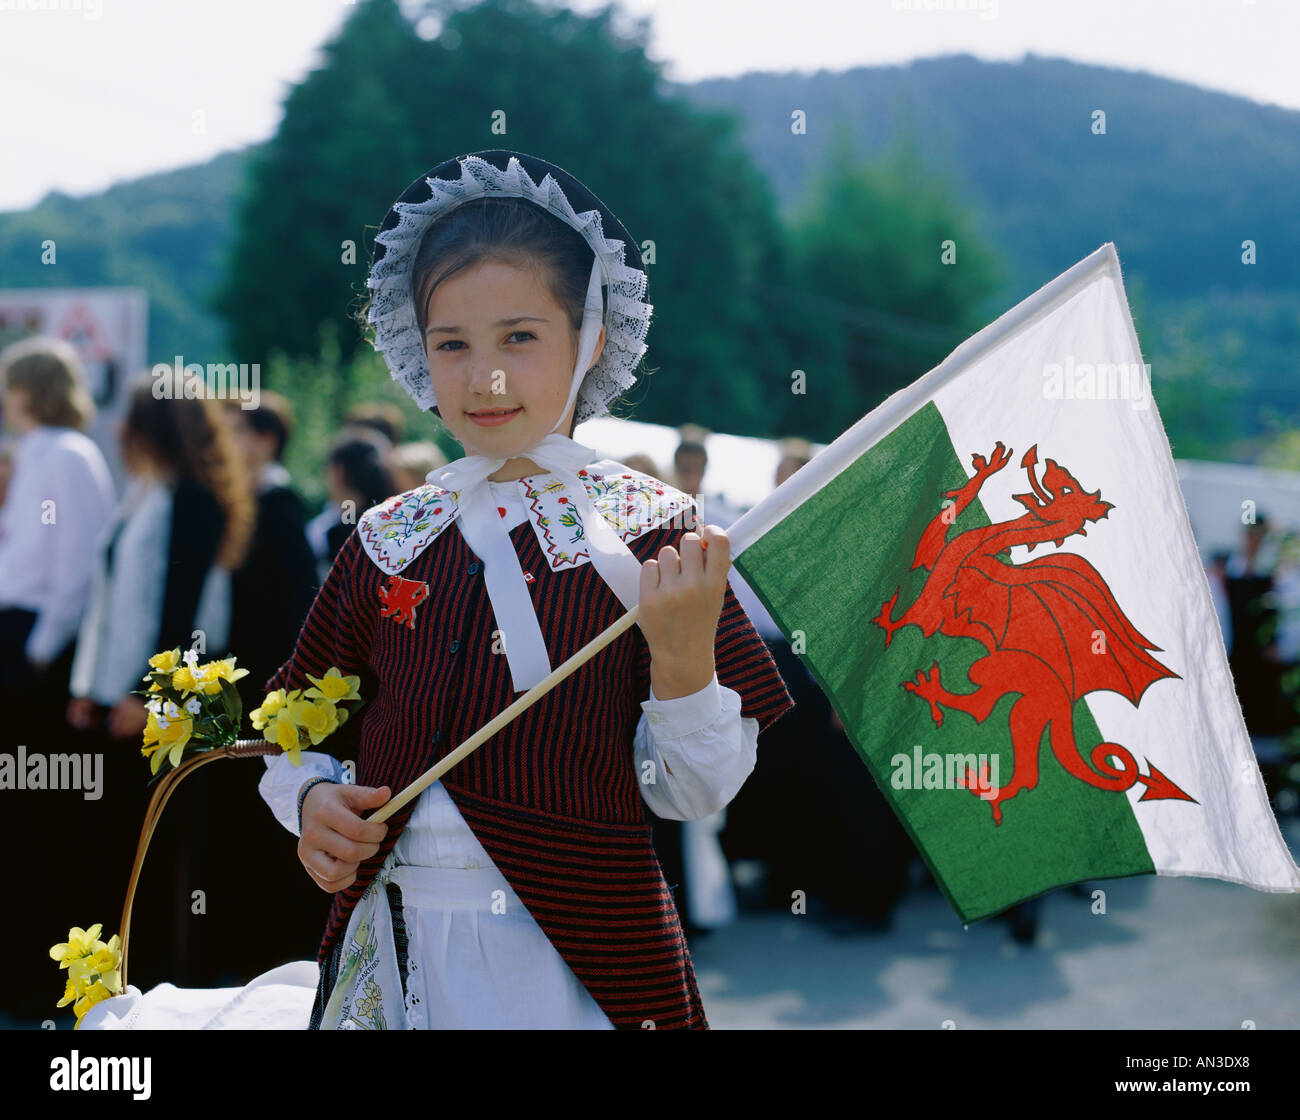 Girl Dressed in Welsh Traditional / National Costume / Dress / Holding Welsh Flag, Wales Stock Photo